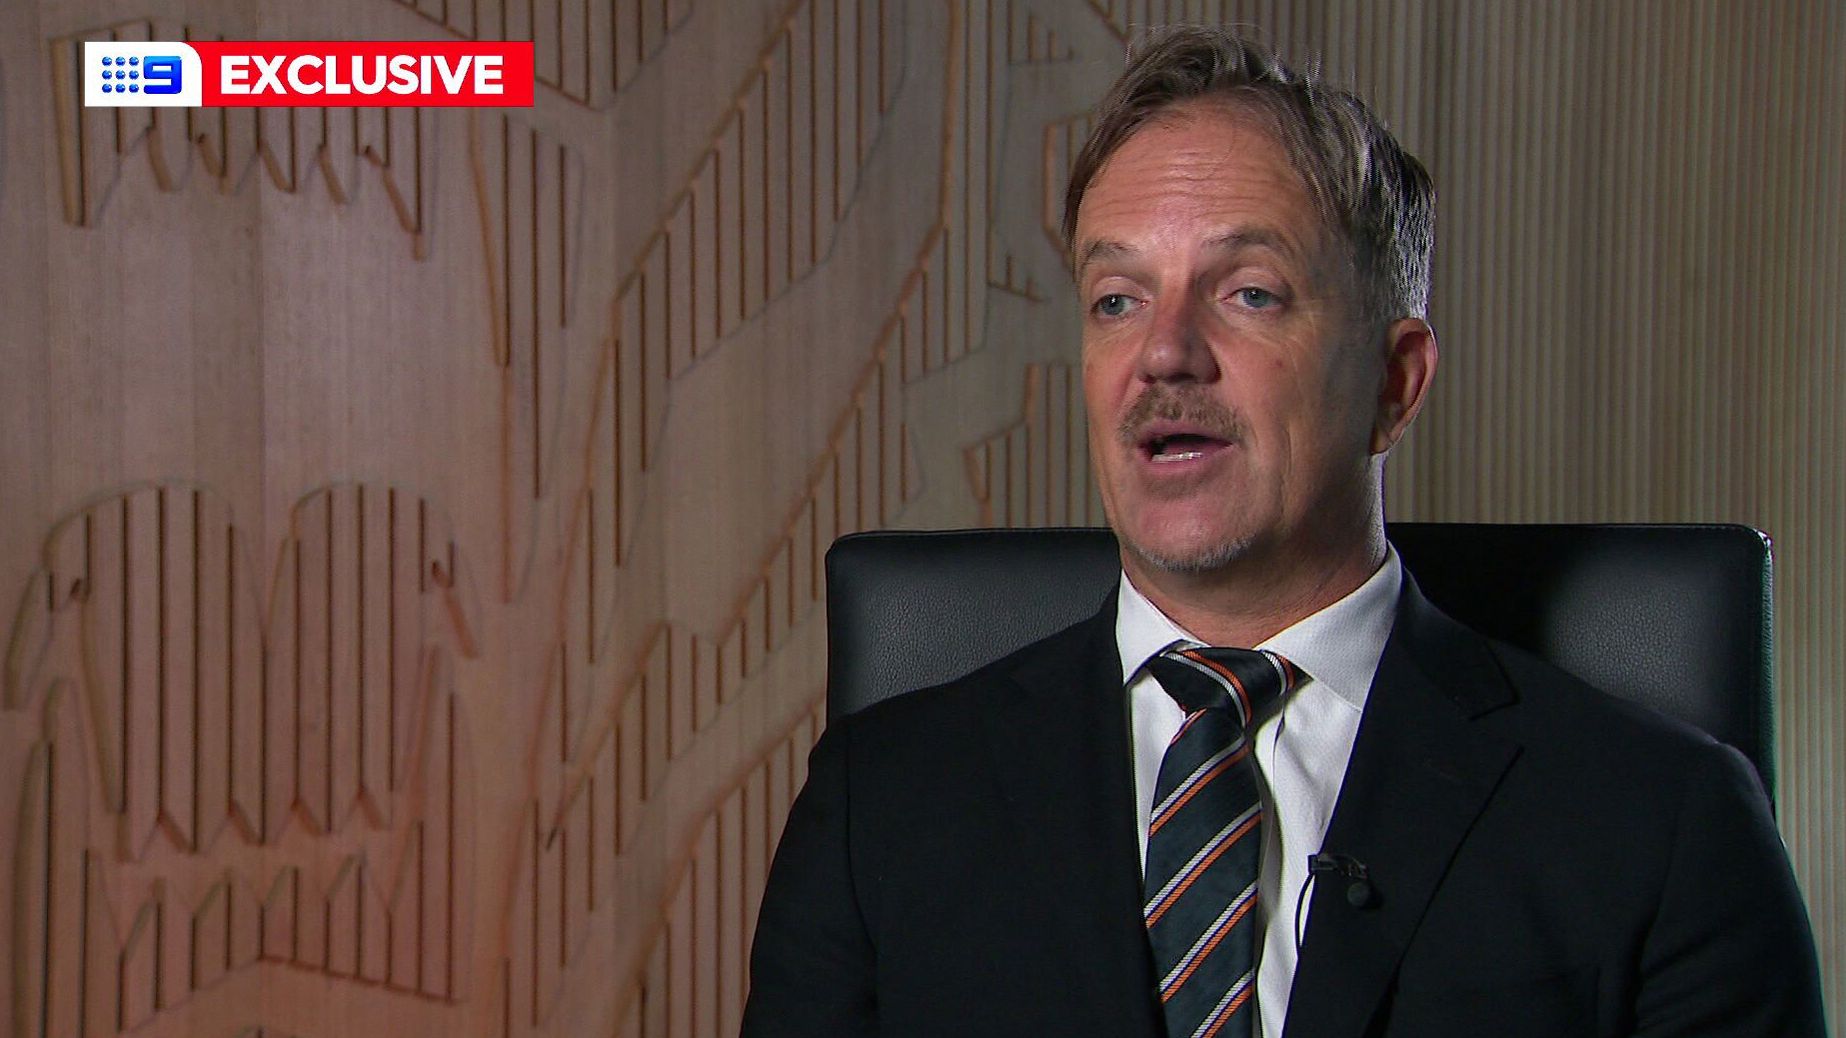 Wests Tigers boss Justin Pascoe speaks to 9News.